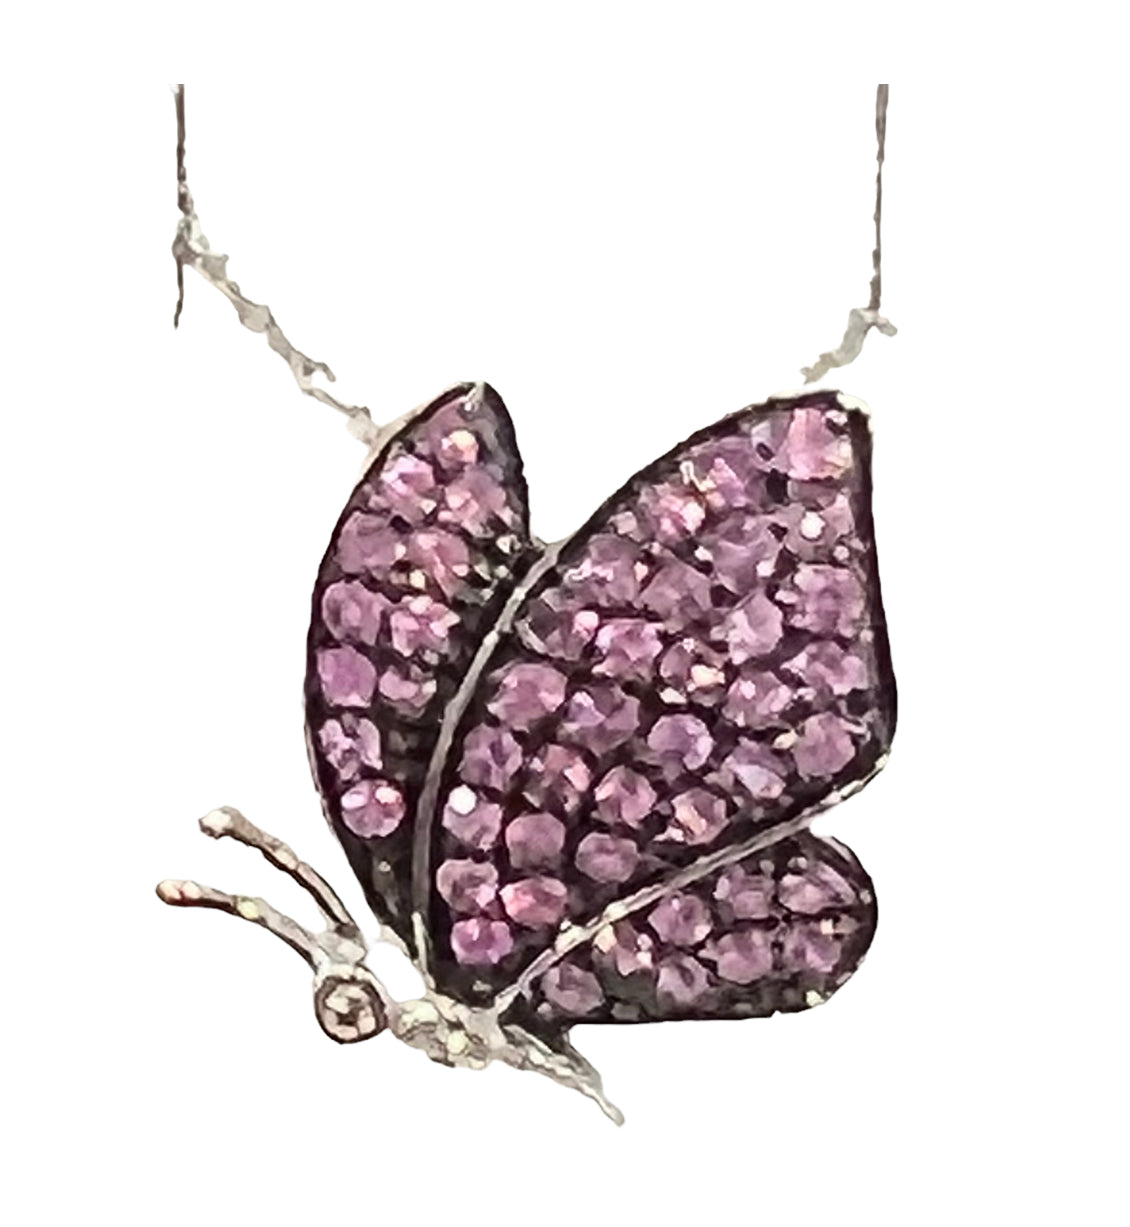 10K White Gold 0.60cttw Pink Sapphire and 0.019cttw Diamond Butterfly Pendant - 18 inches